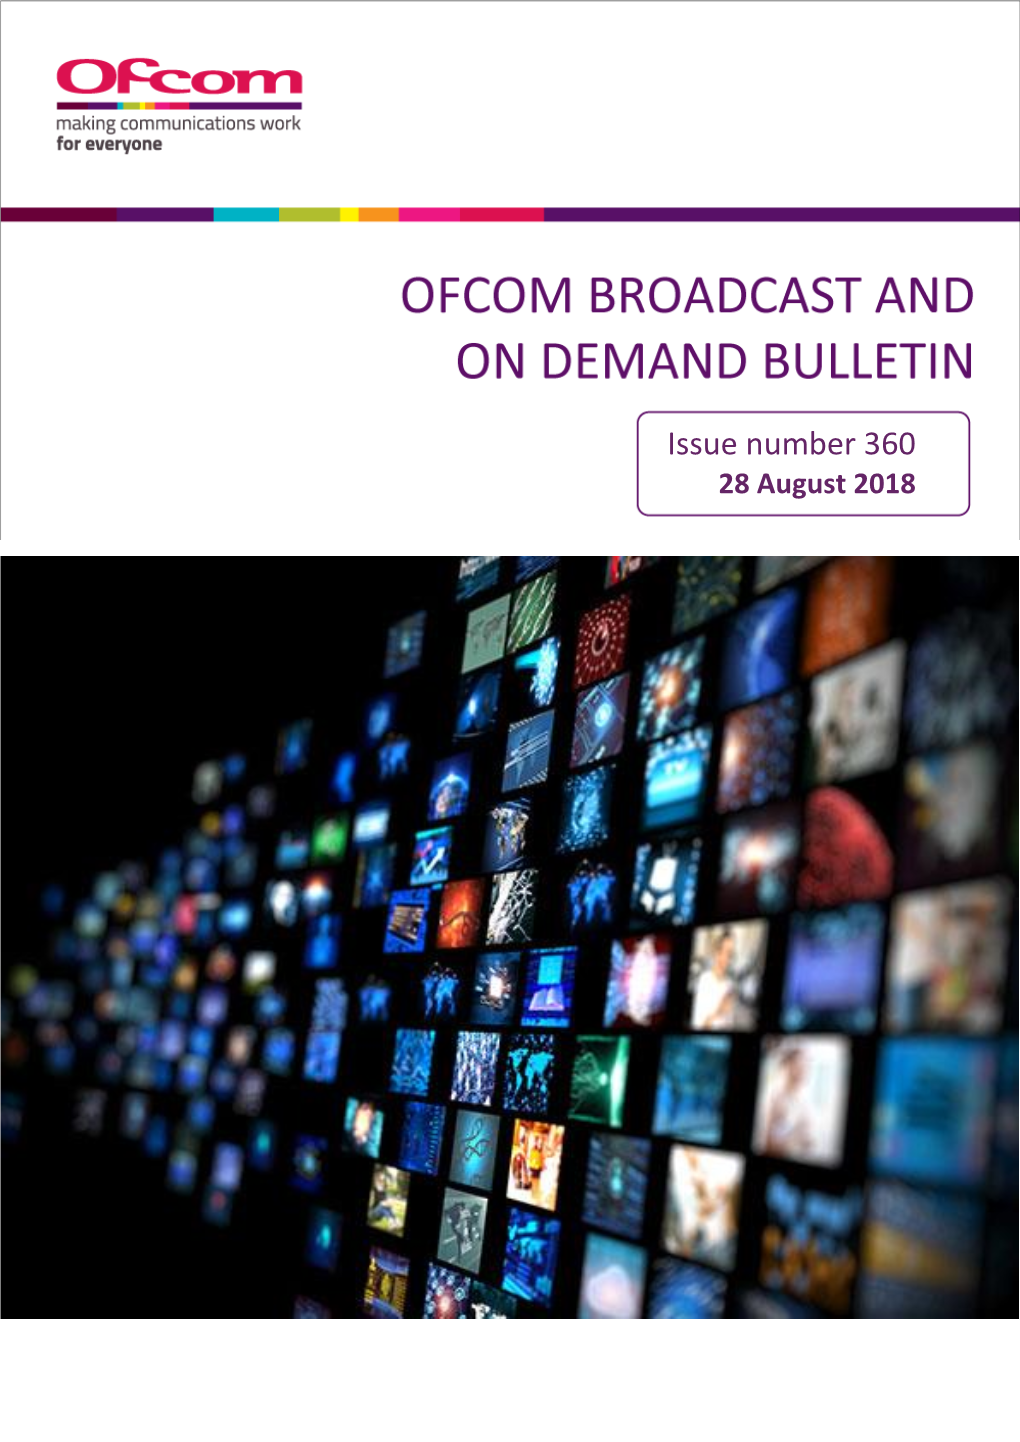 Issue 360 of Ofcom's Broadcast and on Demand Bulletin